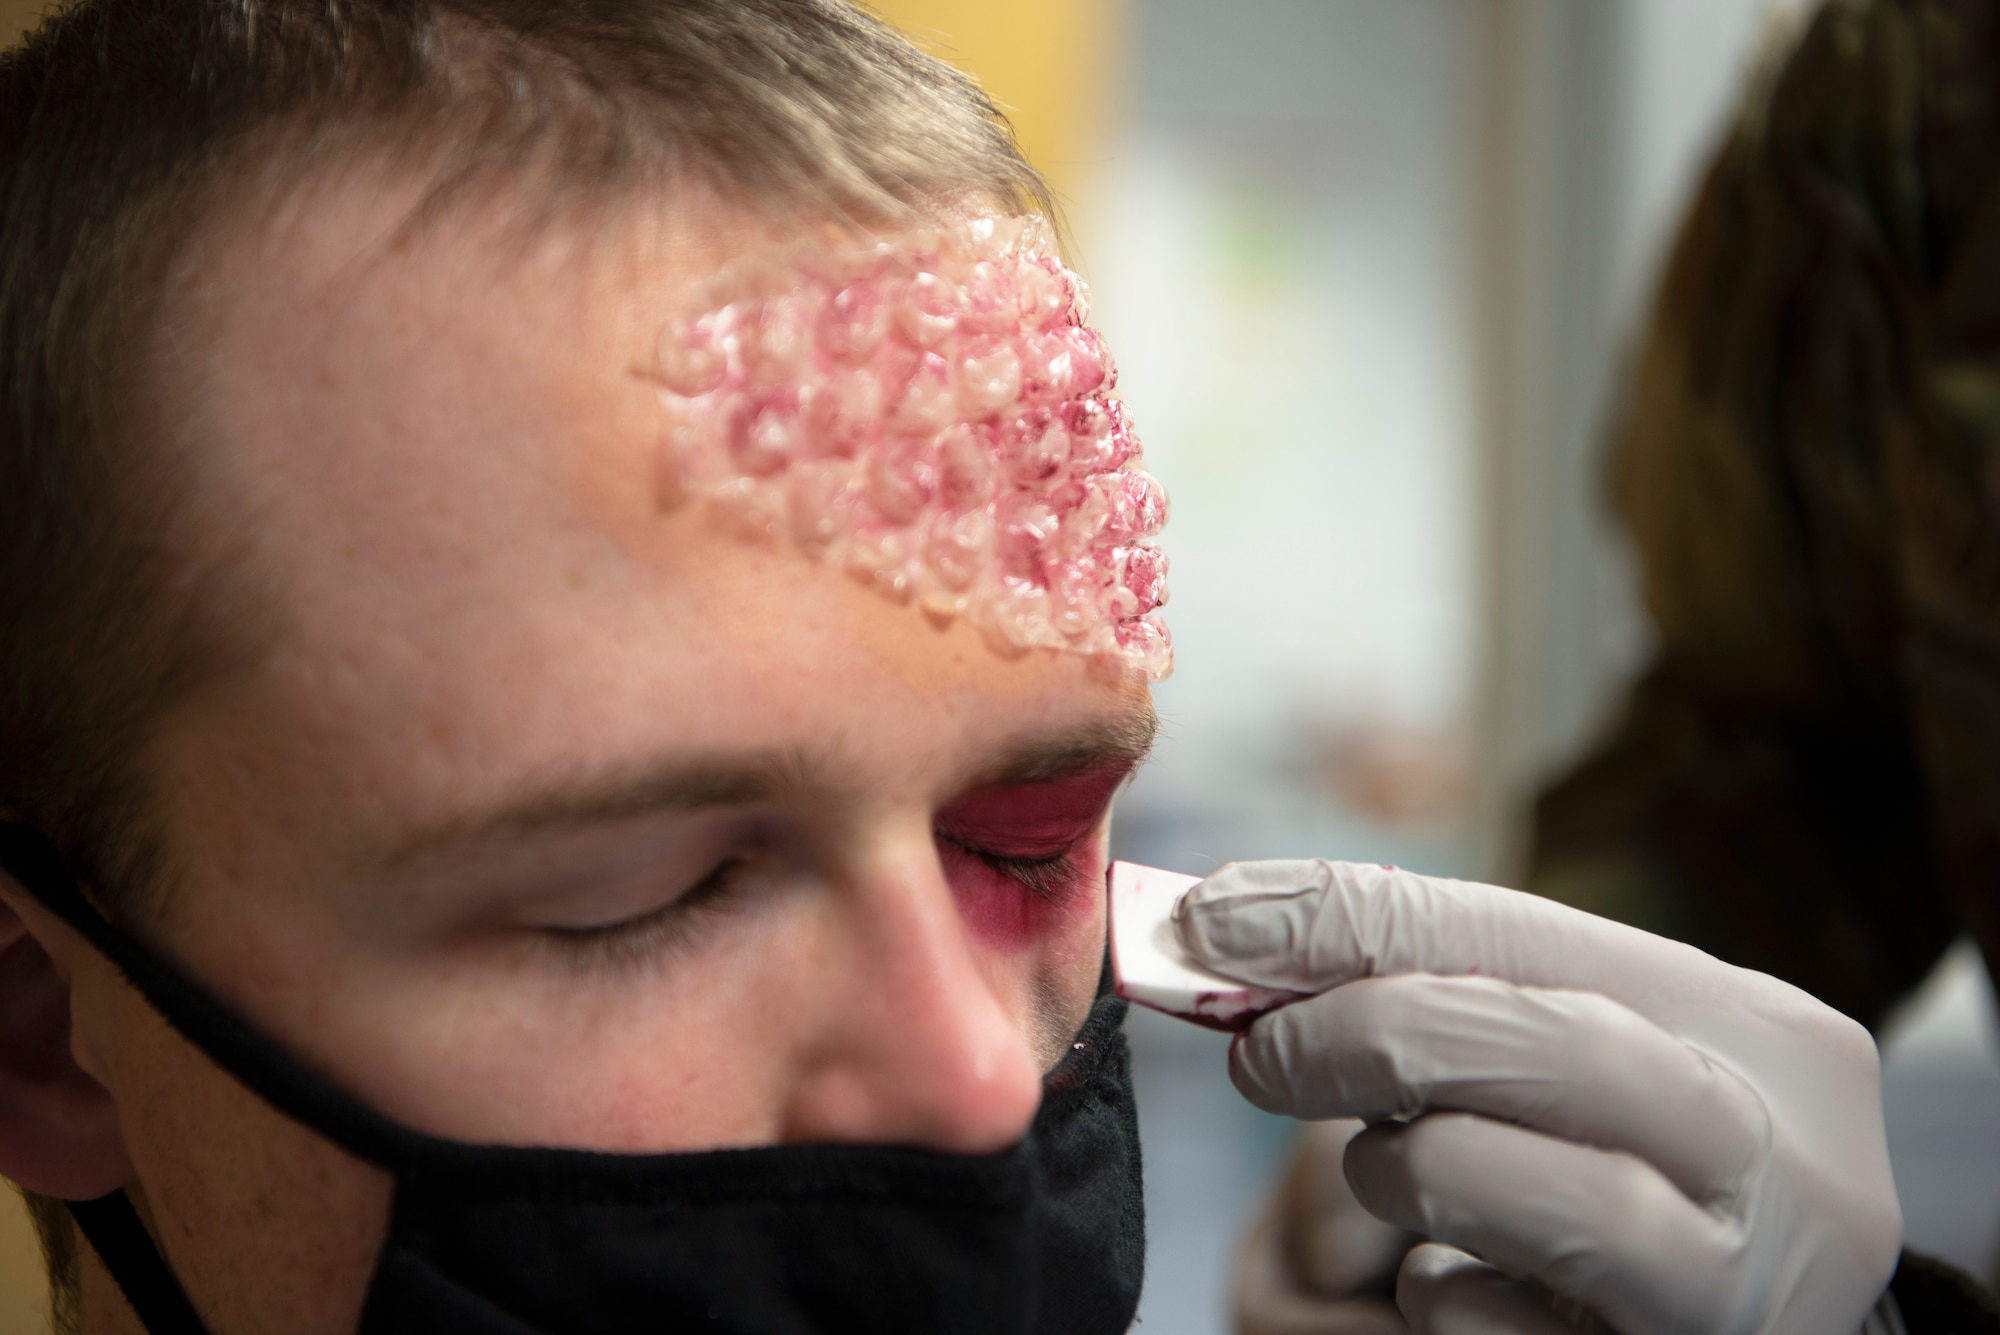 U.S. Air Force Senior Airman James Levesque, 52nd Maintenance Squadron aerospace propulsion journeyman, gets moulage applied to his face during a base readiness exercise at Spangdahlem Air Base, Germany, Nov. 18, 2020. The moulage simulated a chemical burn and was intended to provide practice for the medical team on how to deal with these injuries. (U.S. Air Force photo by Senior Airman Jovante Johnson)